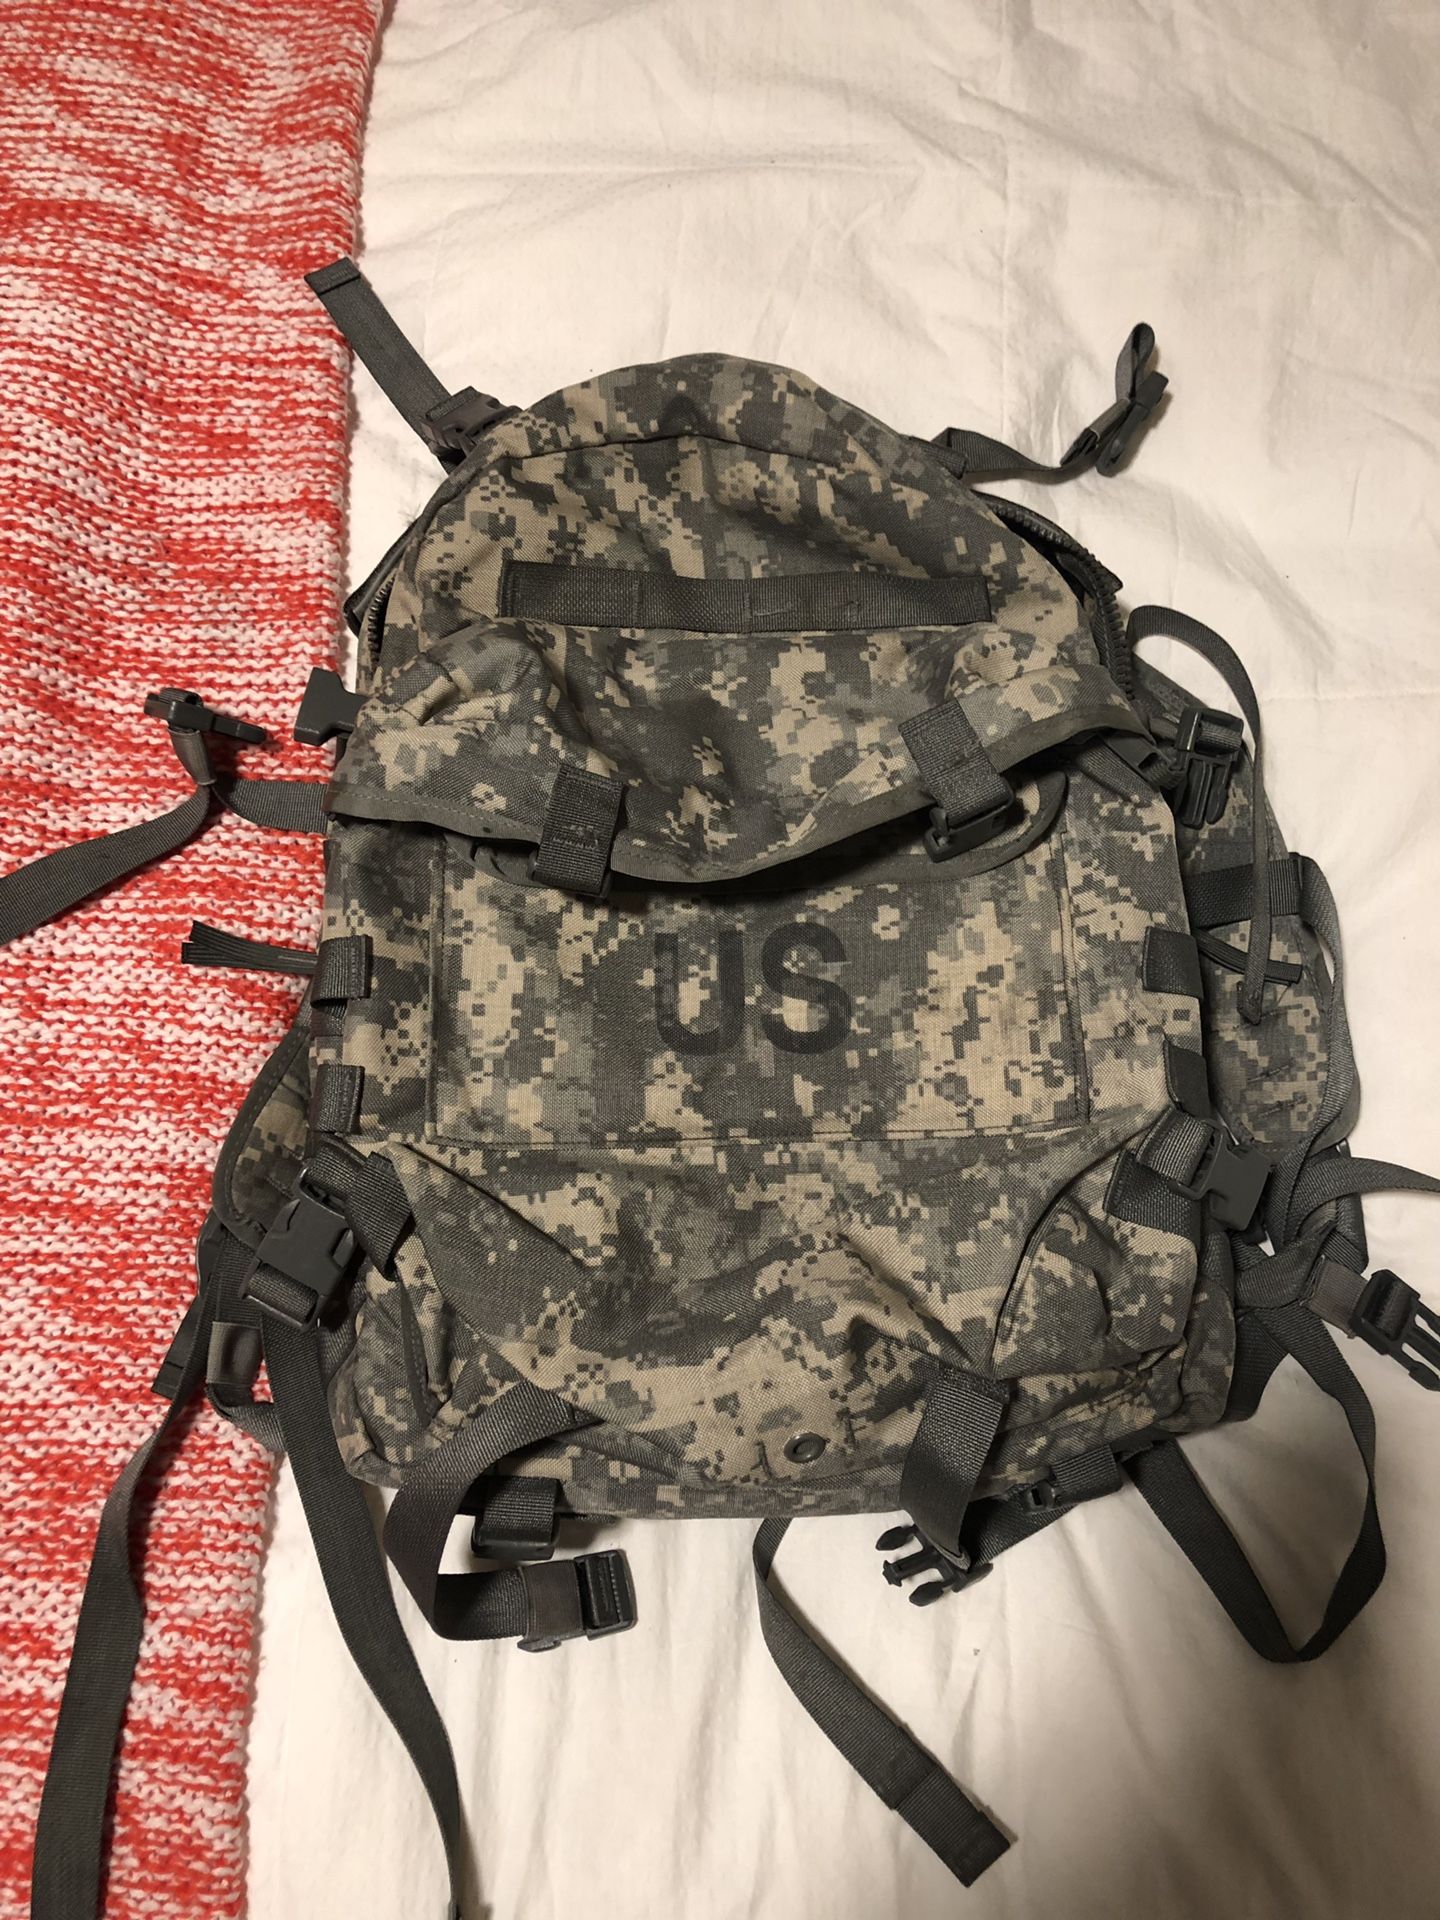 US Army backpack